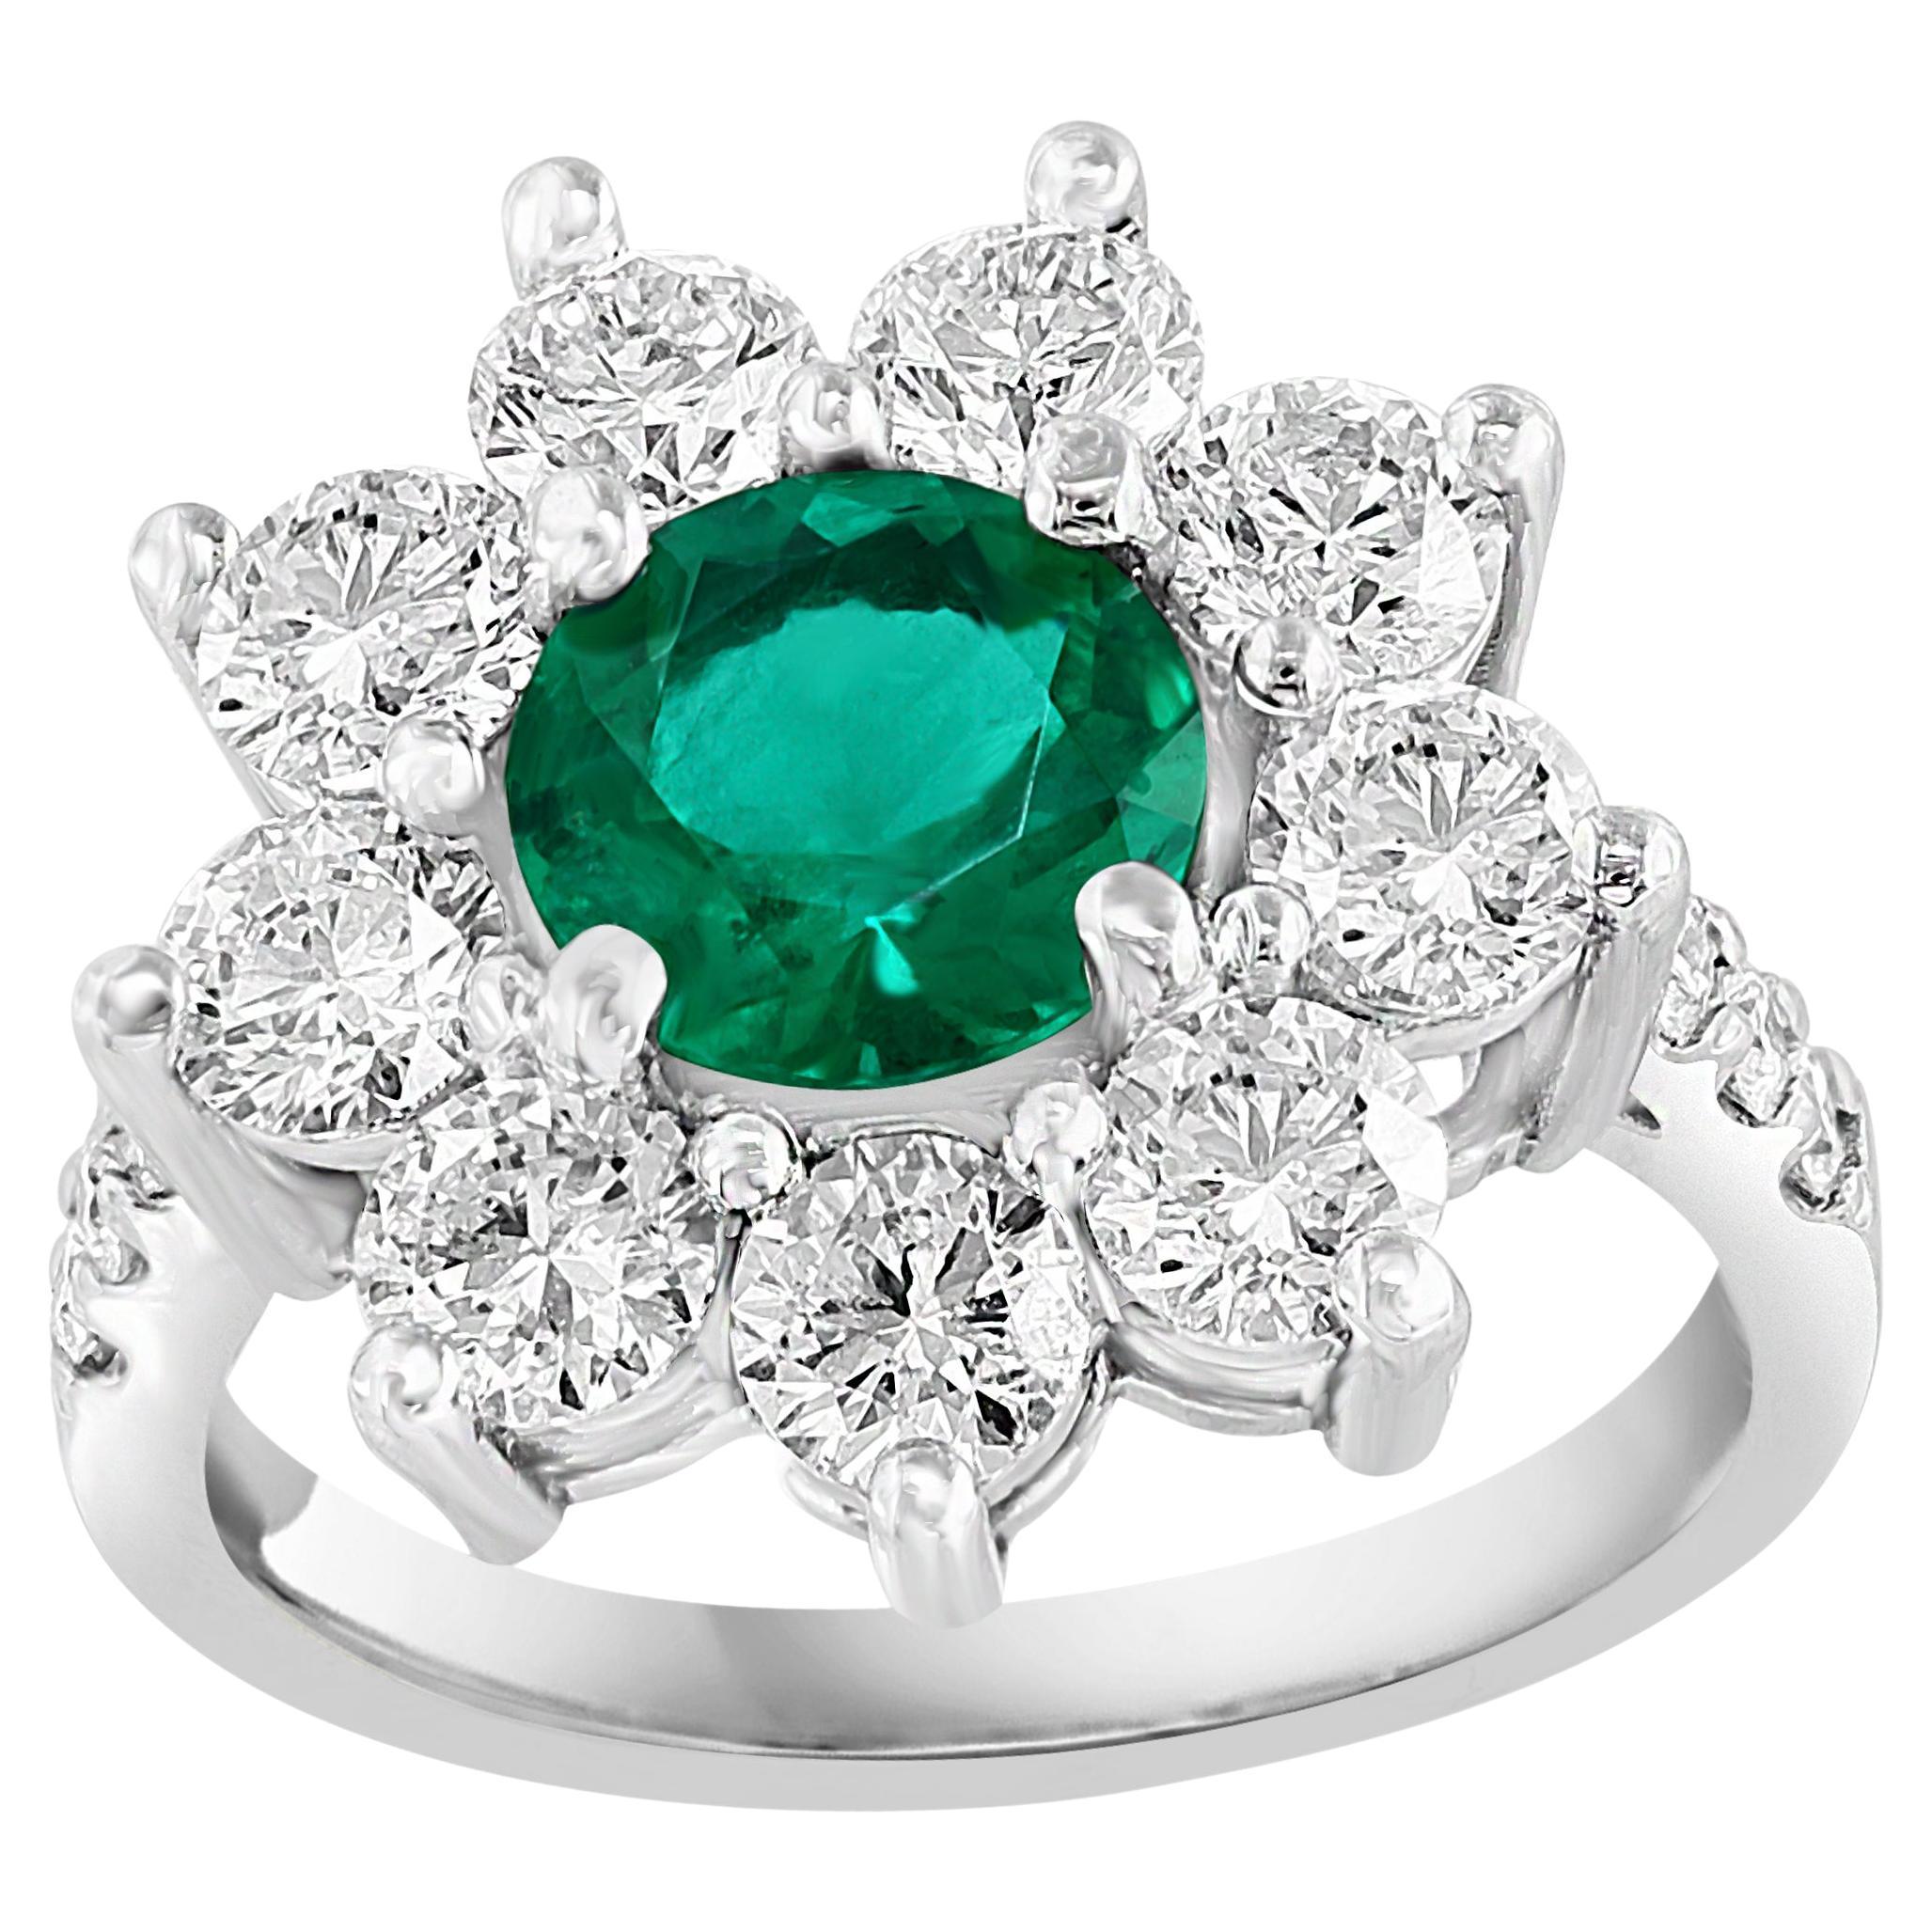 1.18 Carat Brilliant Cut Emerald and Diamond Ring in 14K White Gold For Sale